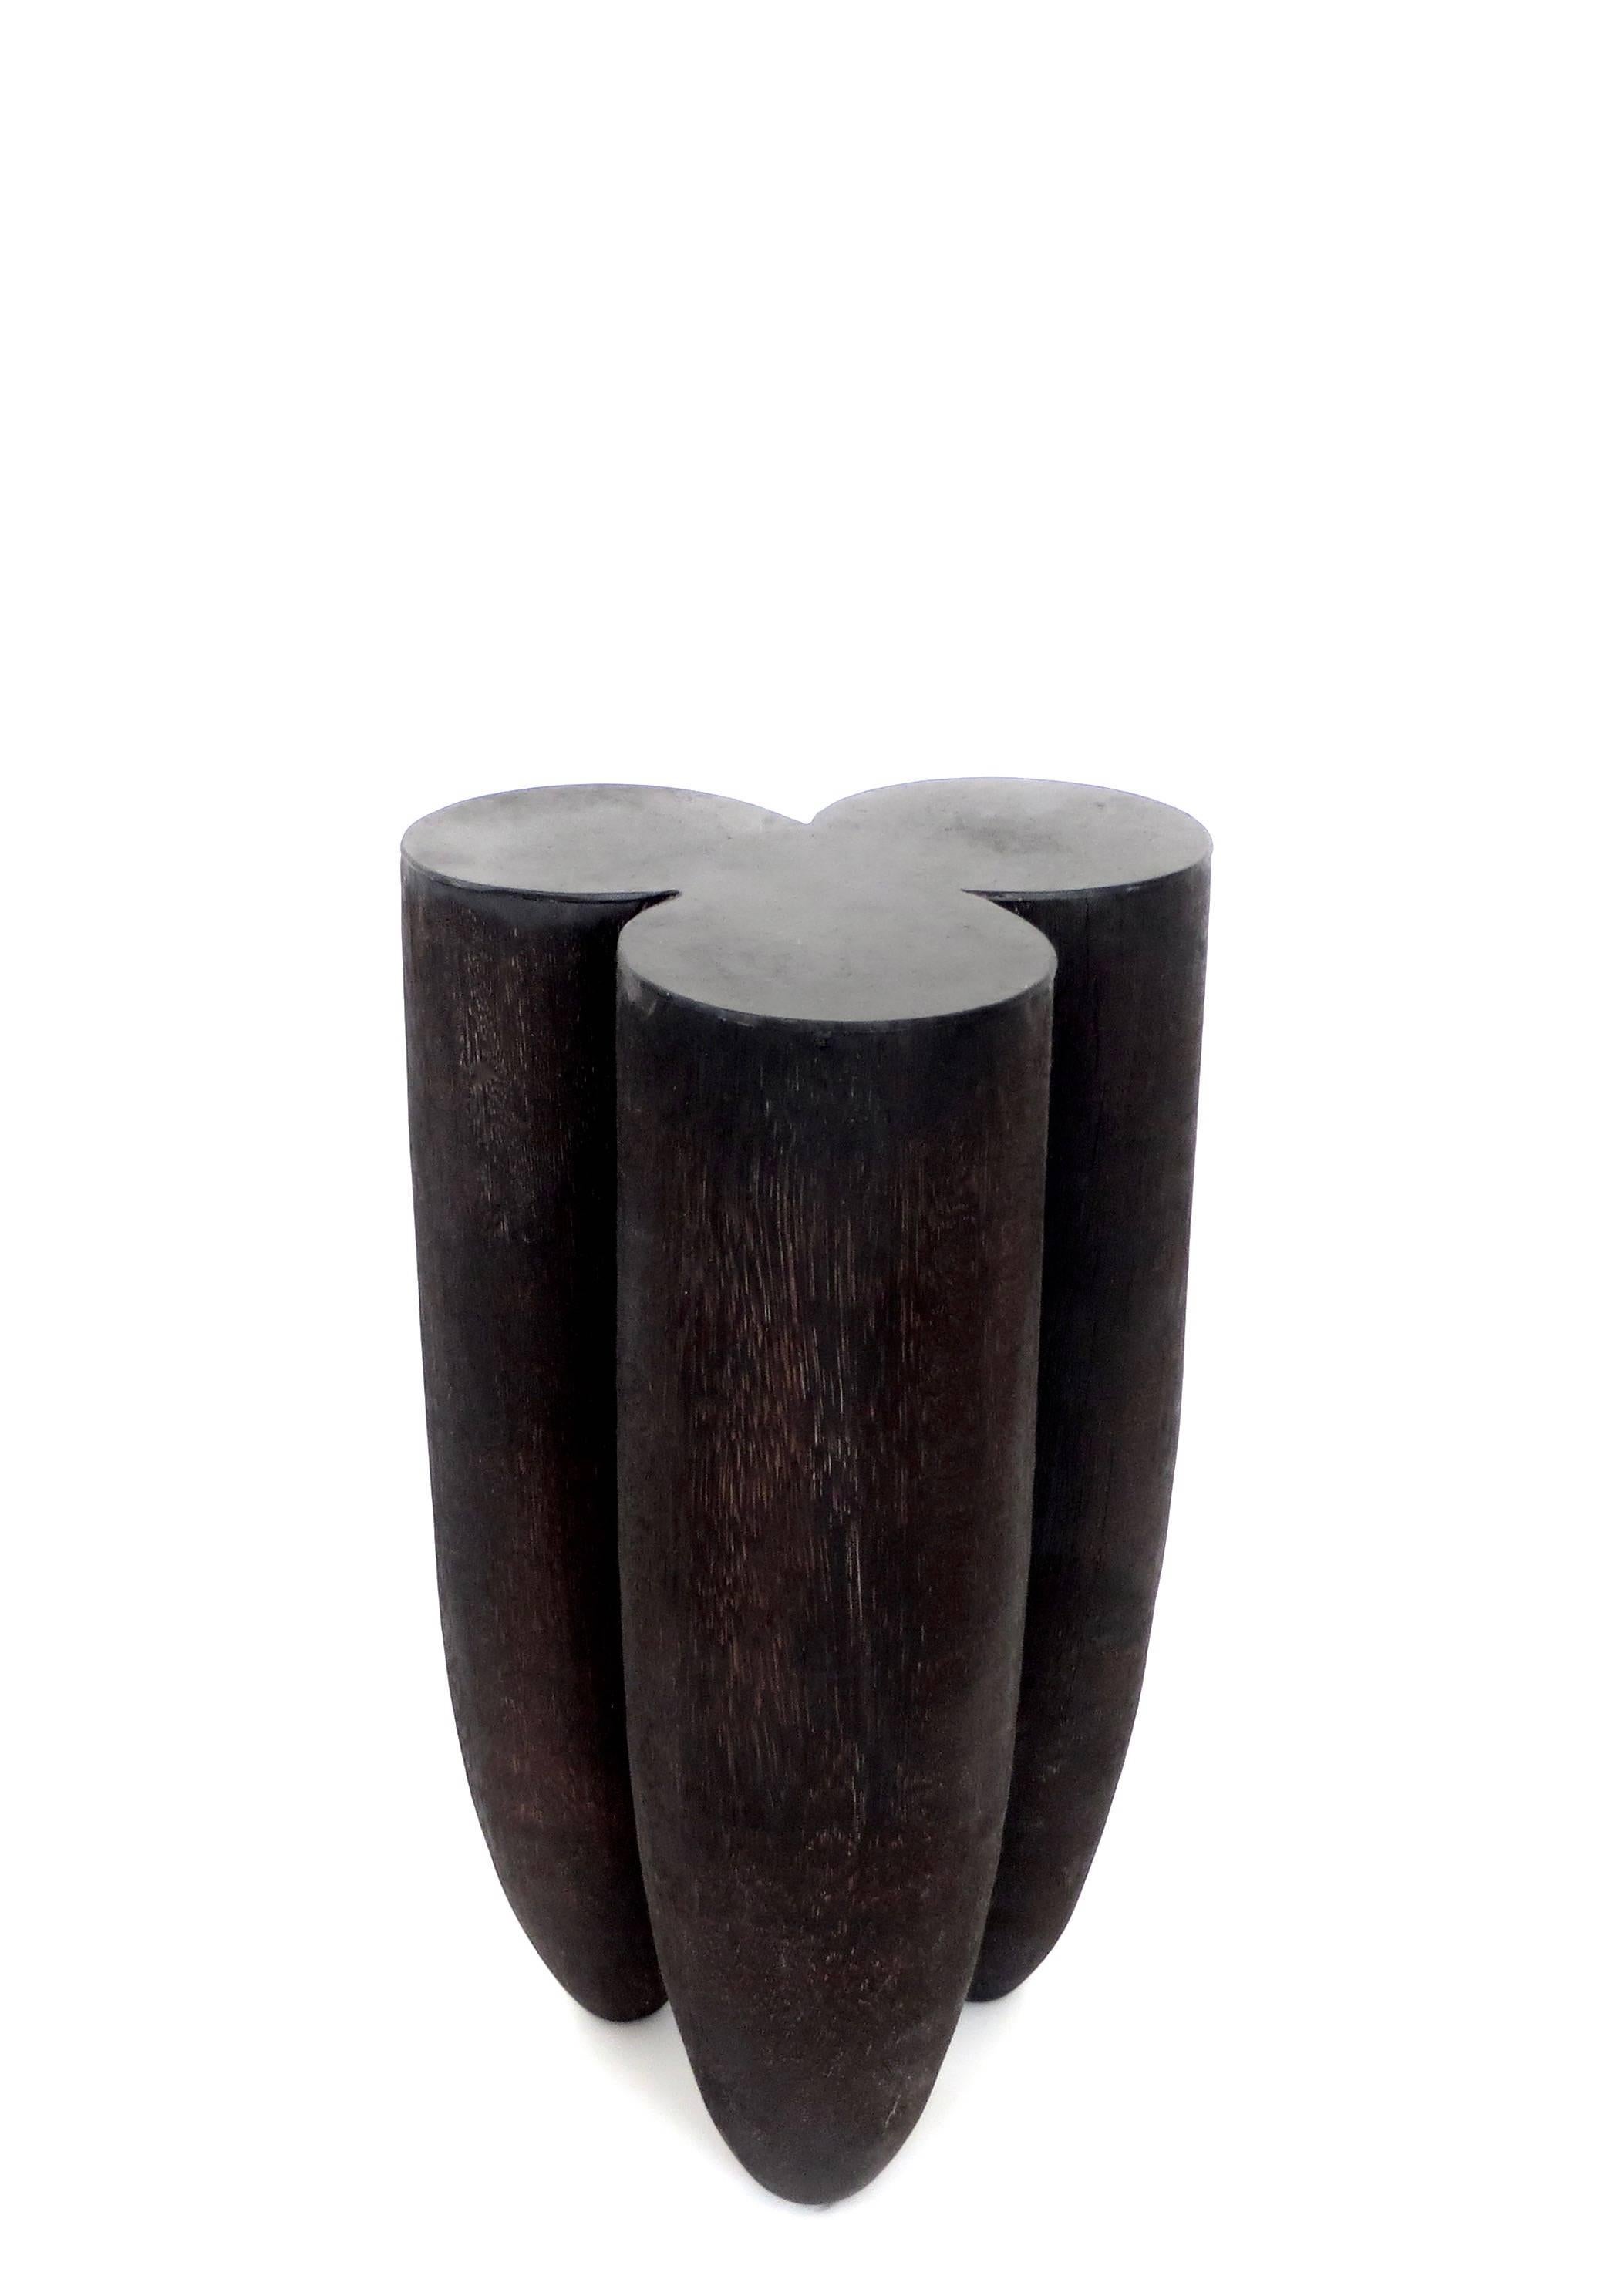 Modern Black Iroko Wood and Burned Steel Senufo Side Table or Stool by Arno Declercq